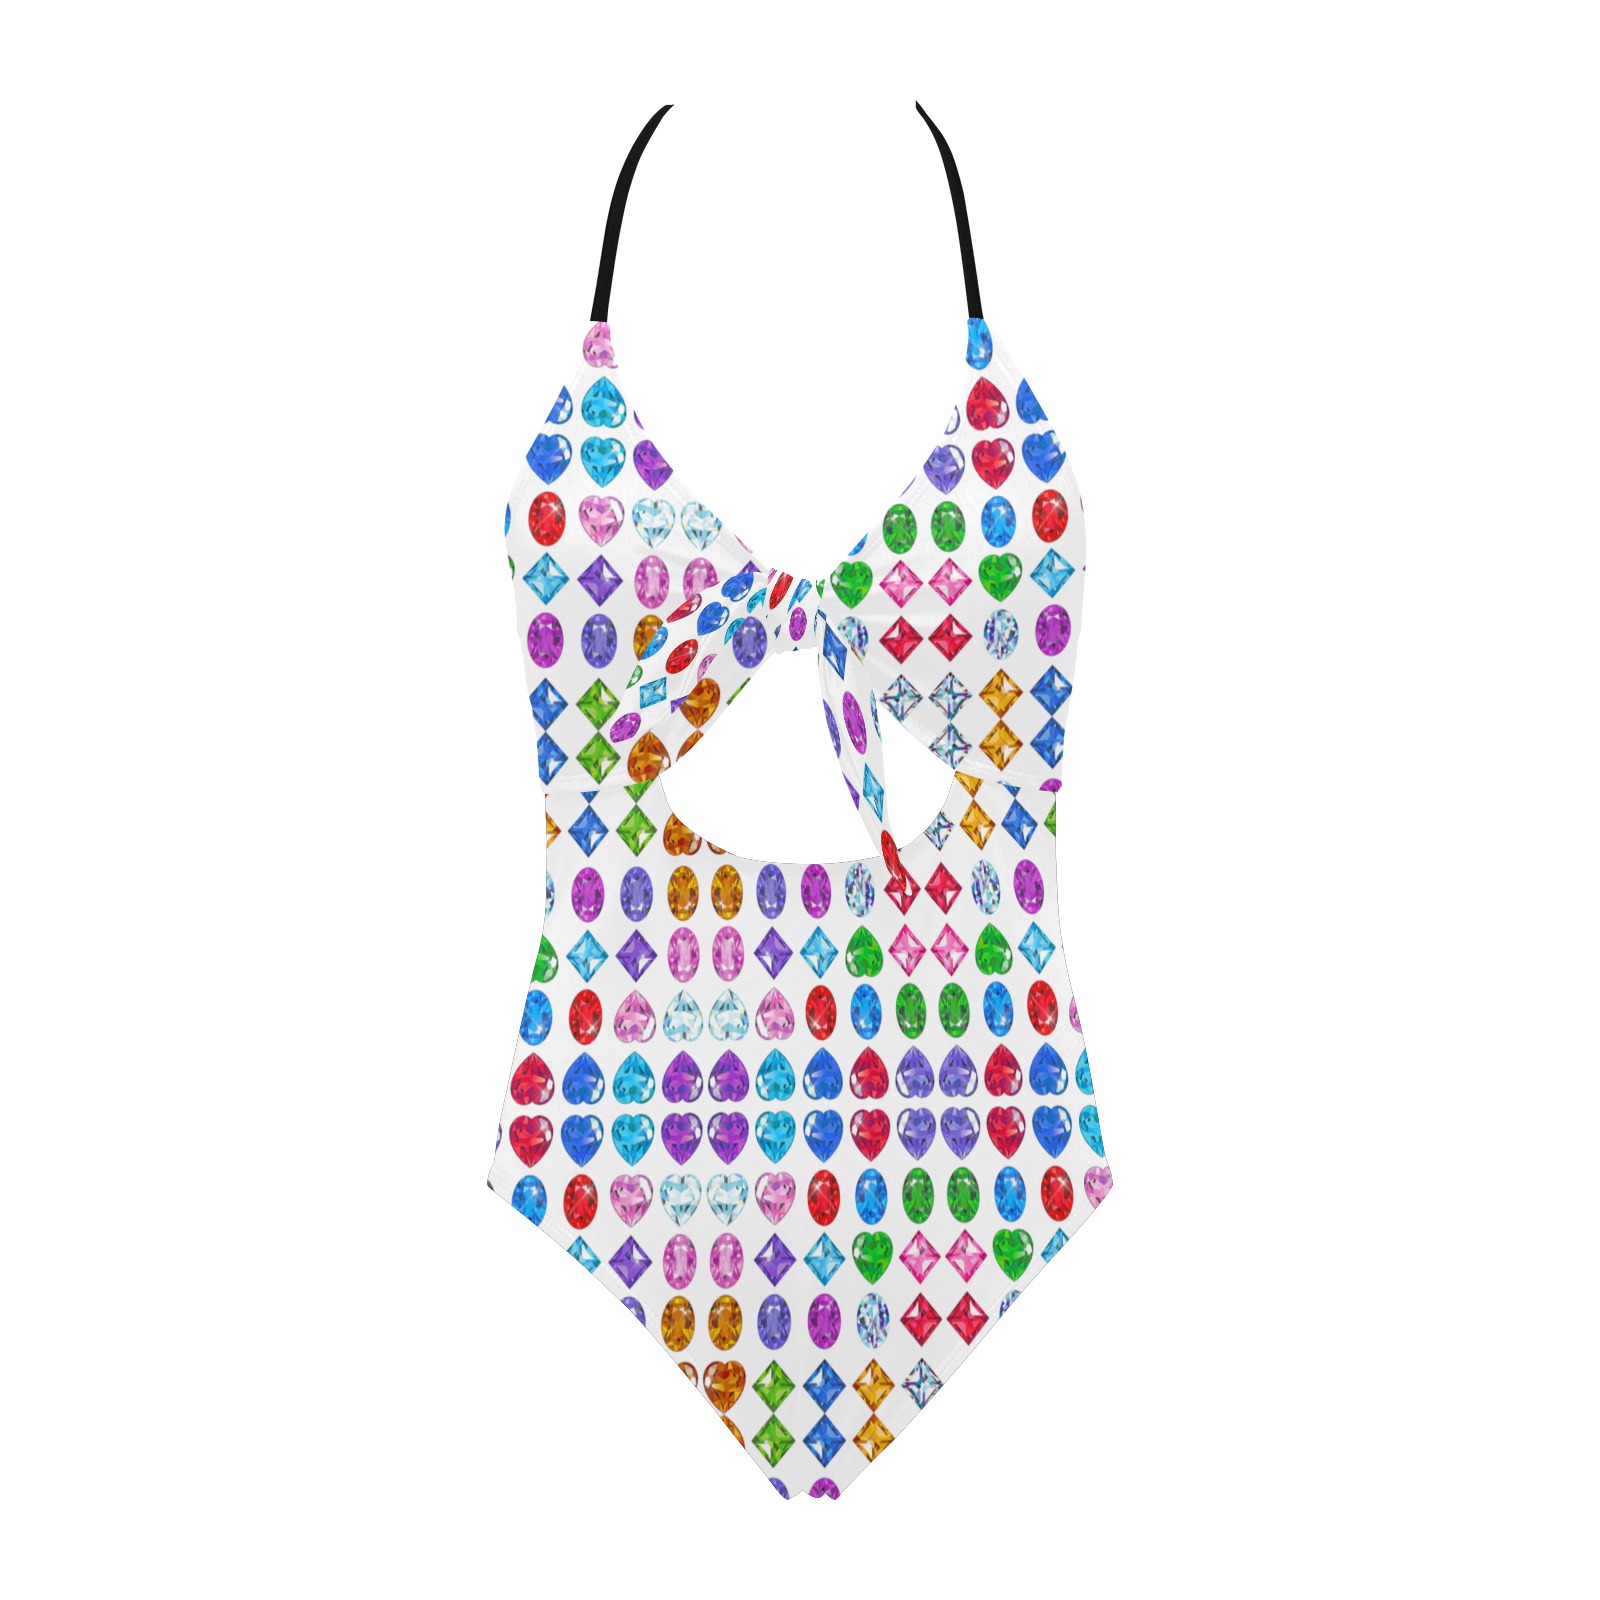 BLING 7 Backless Hollow Out Bow Tie Swimsuit (Model S17)